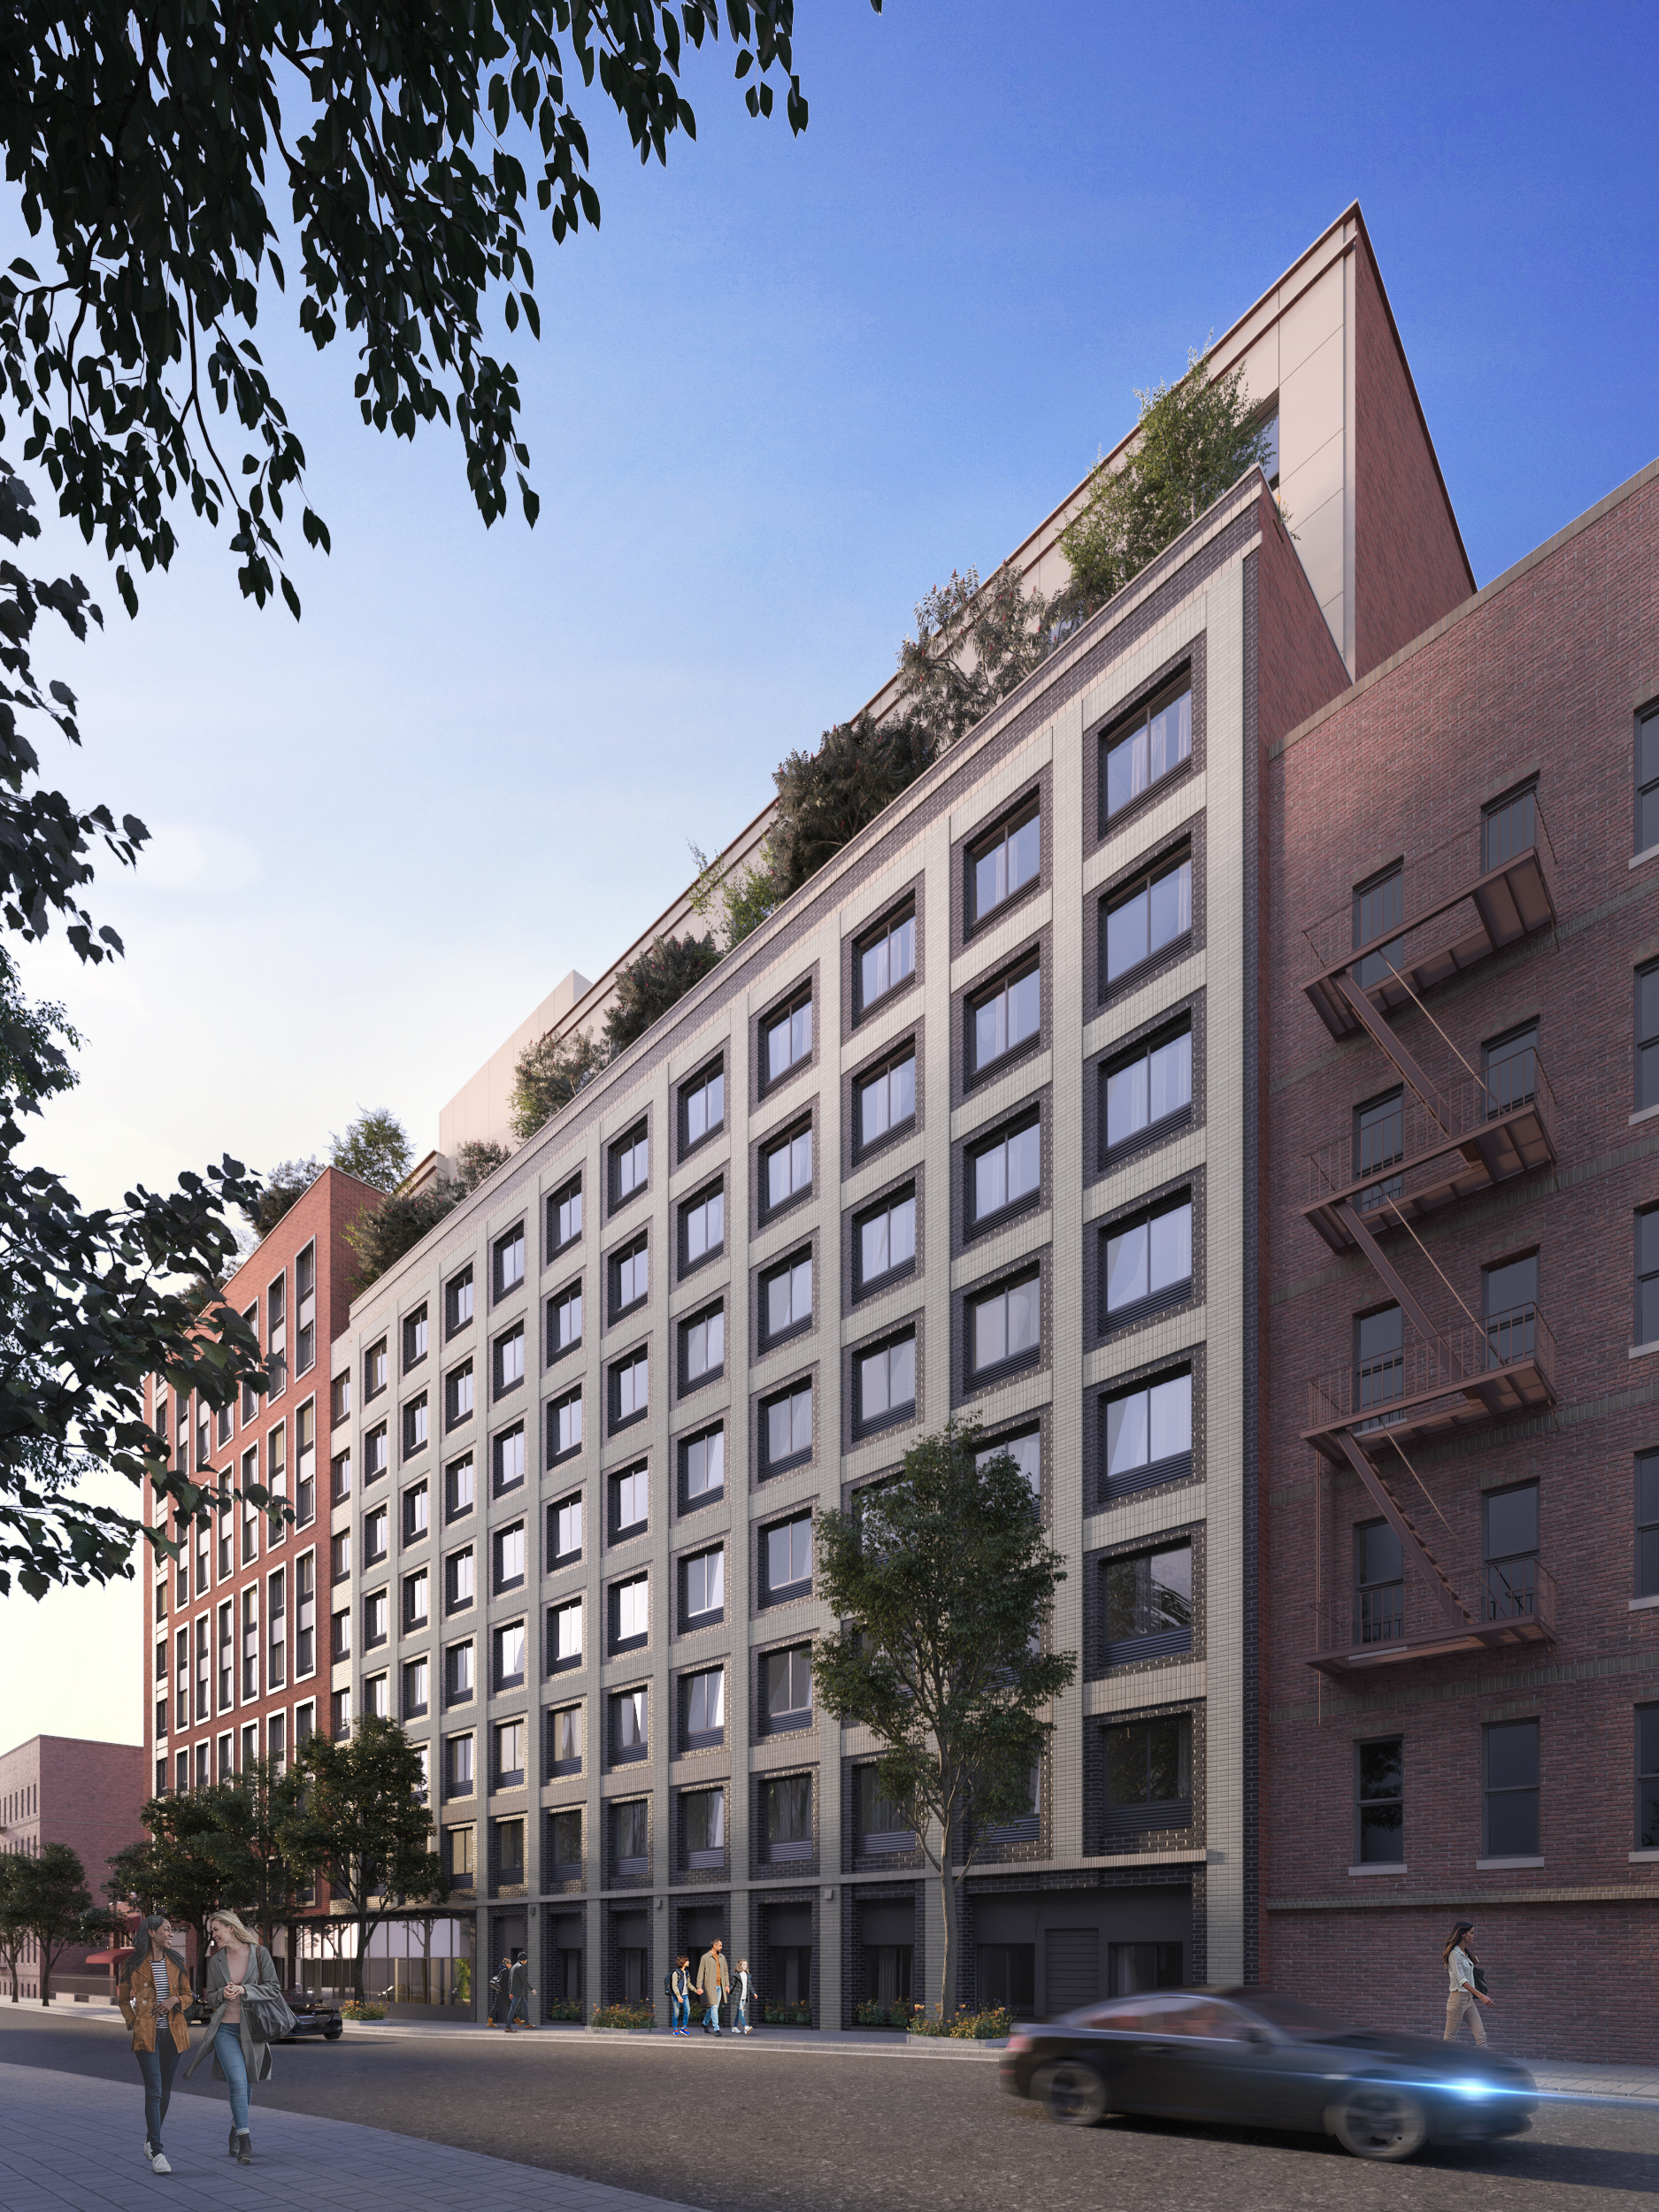 A $164M Affordable & Supportive Housing Development Is Coming To The Bronx